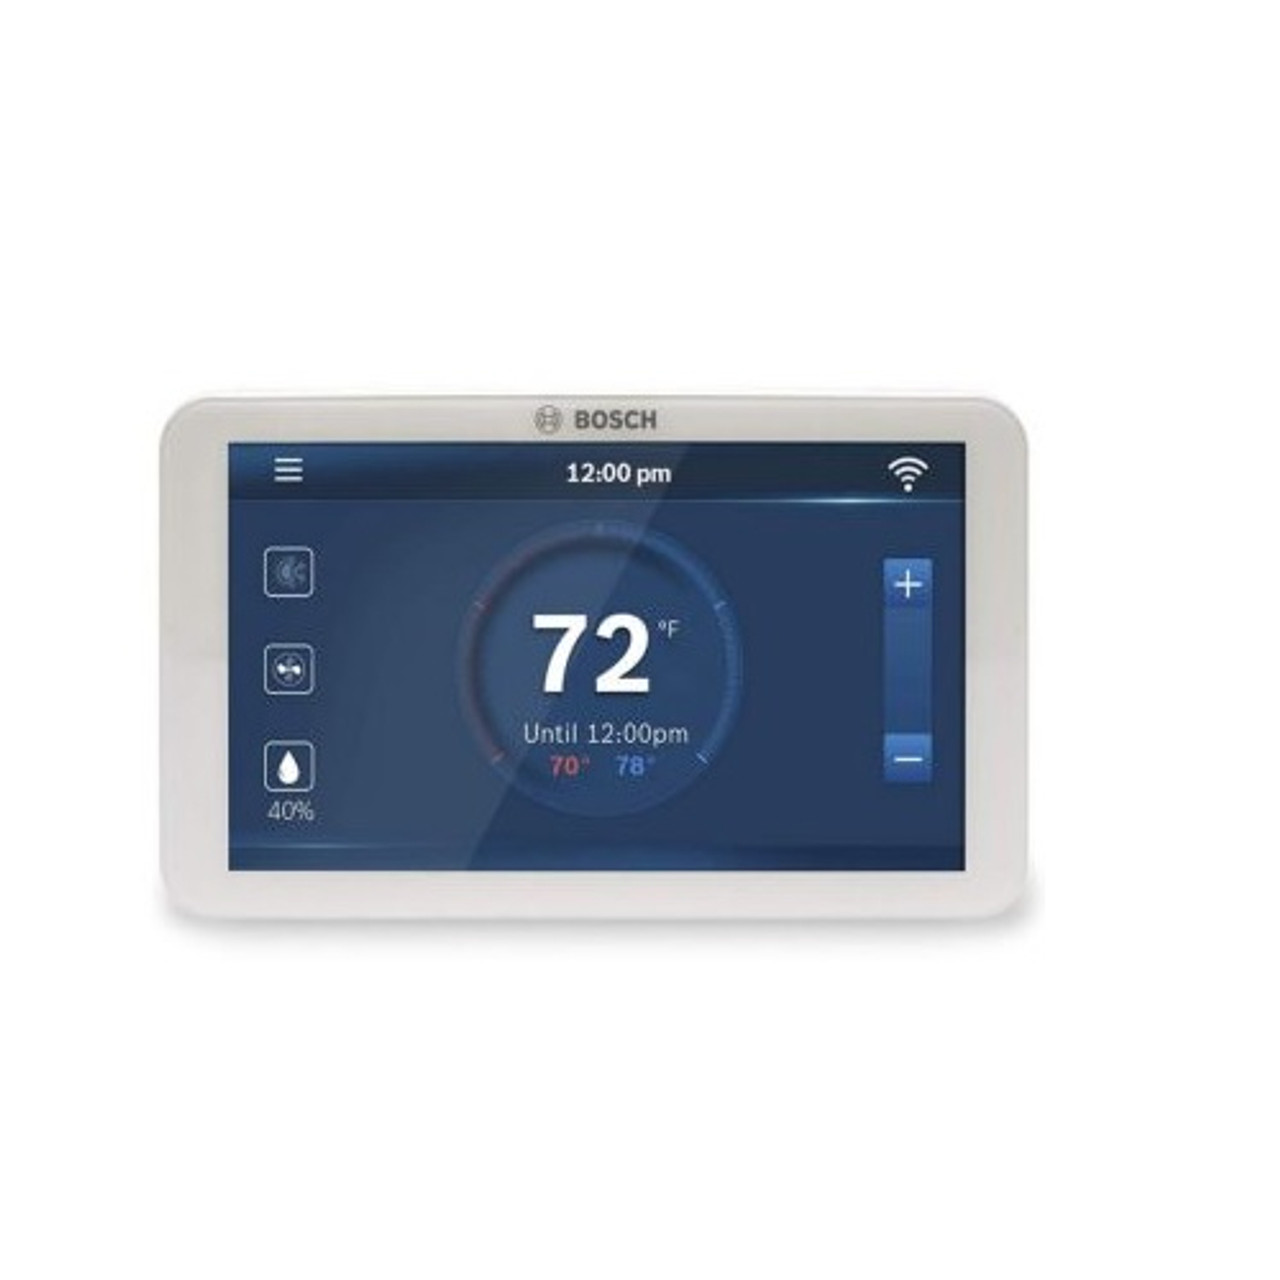 Bosch 8-733-948-009 Connected Control BCC100 Wi-Fi Thermostat - Rfwel Engr  E-Store